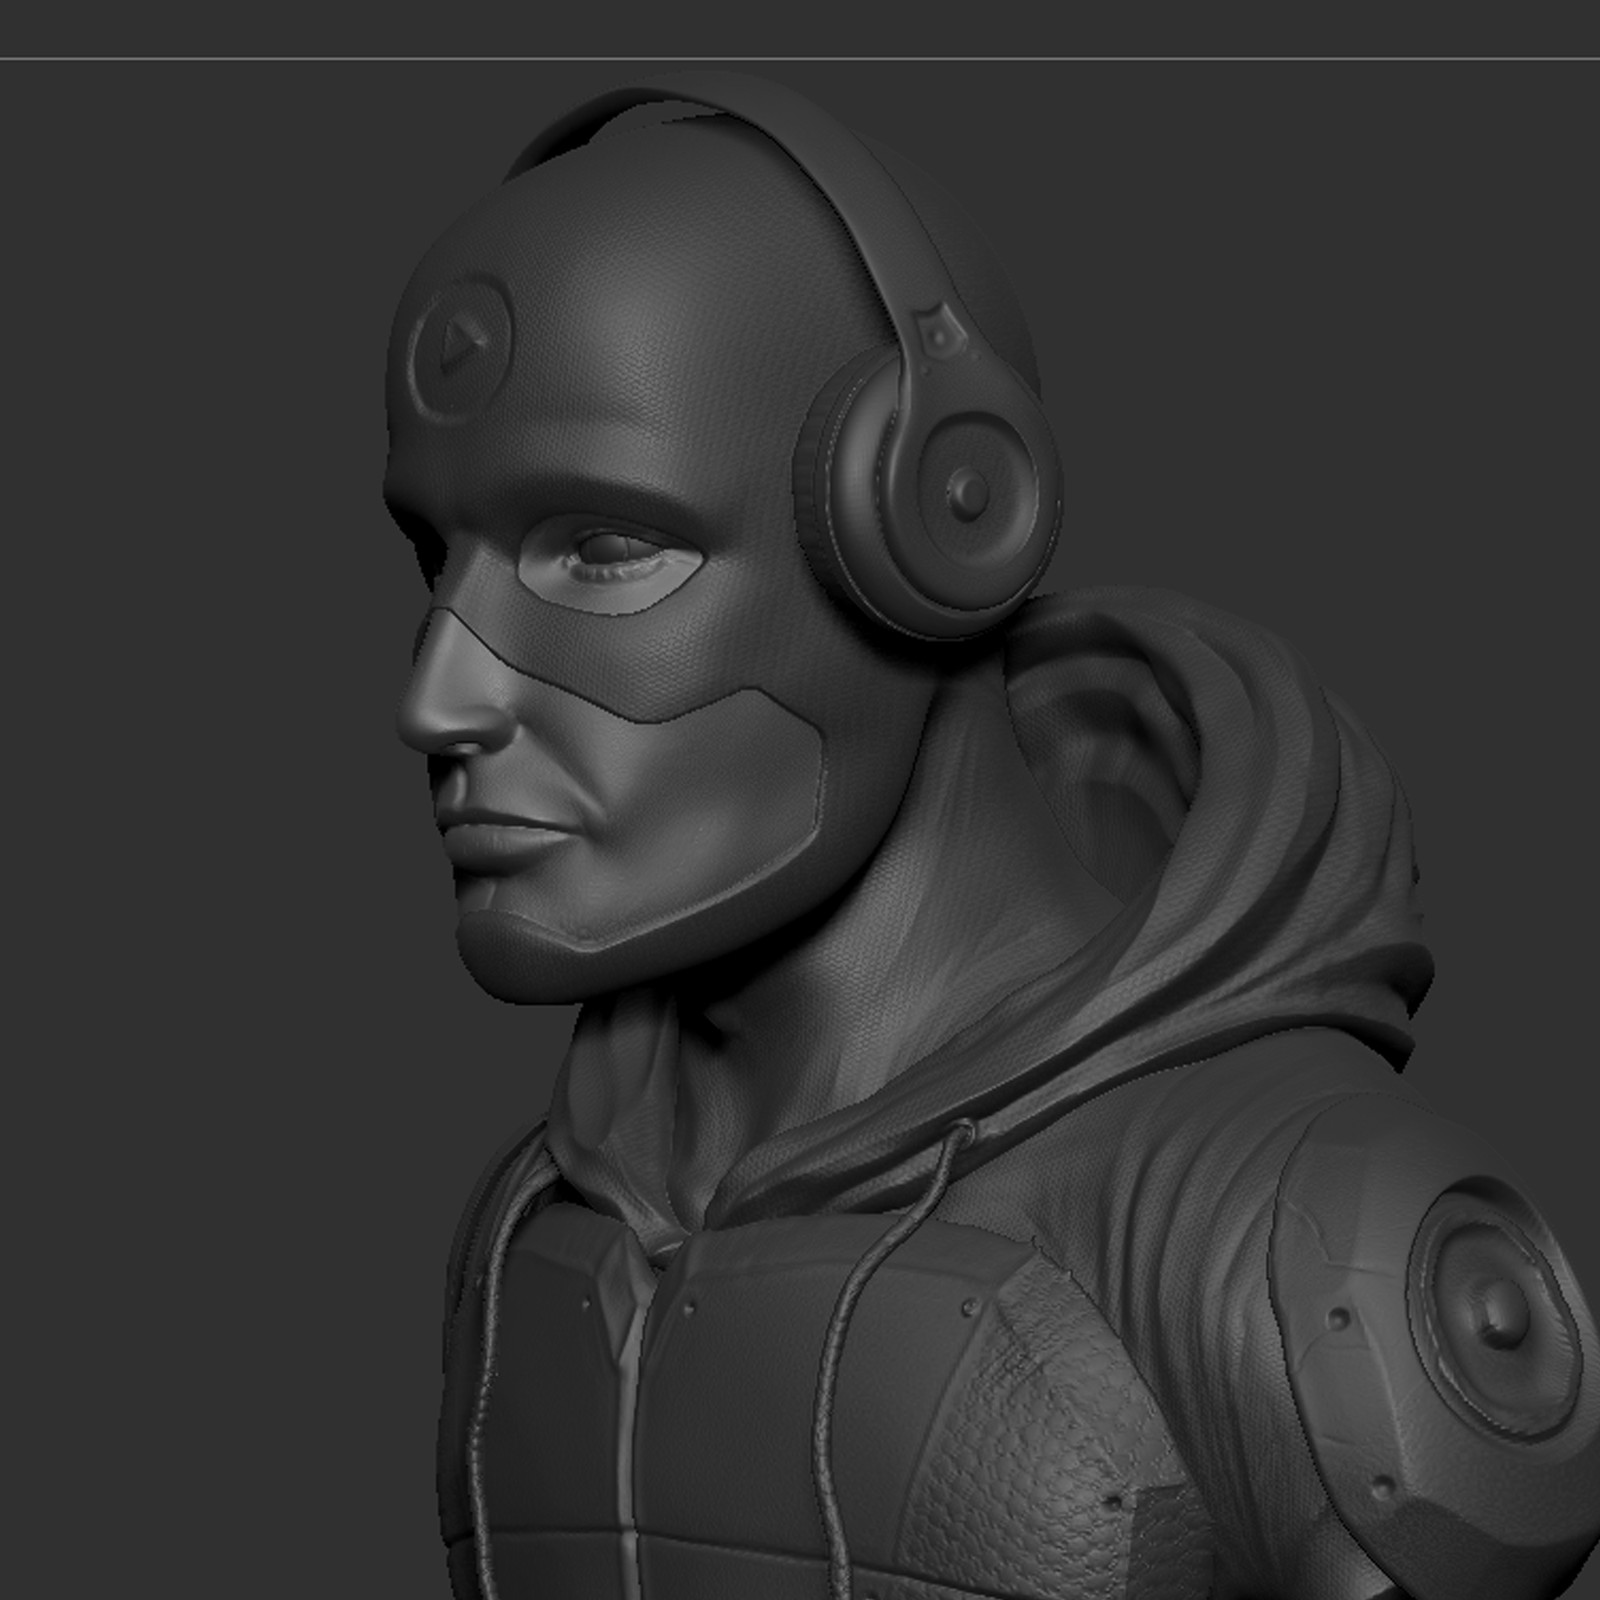 The music man. bust sculpture I made in zbrush.